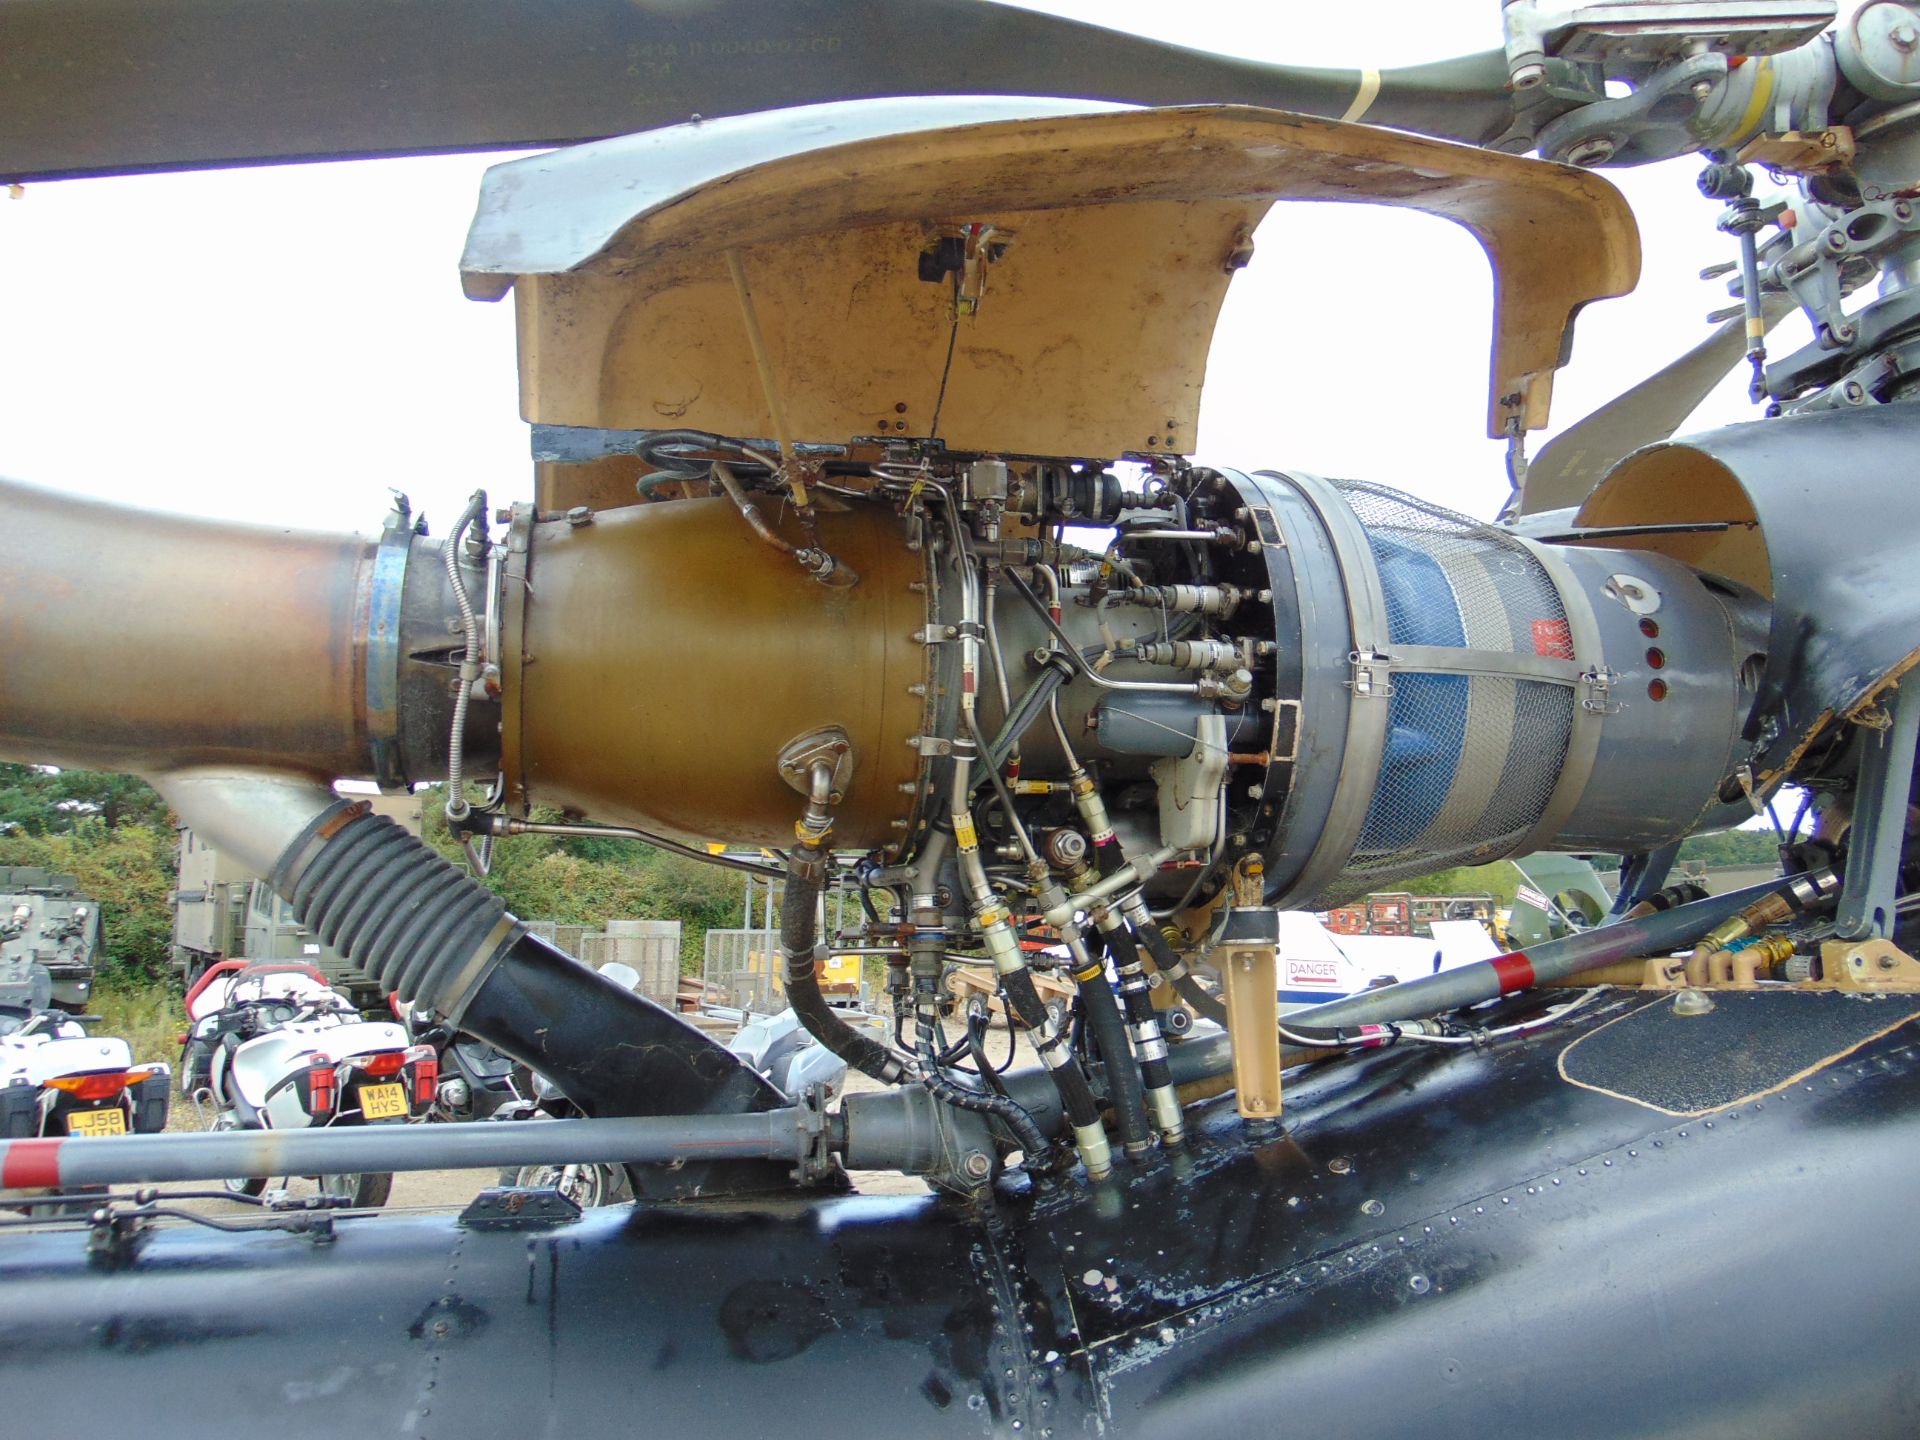 GAZELLE AH1 TURBINE HELICOPTER FROM UK MINISTRY OF DEFENCE - Image 25 of 26